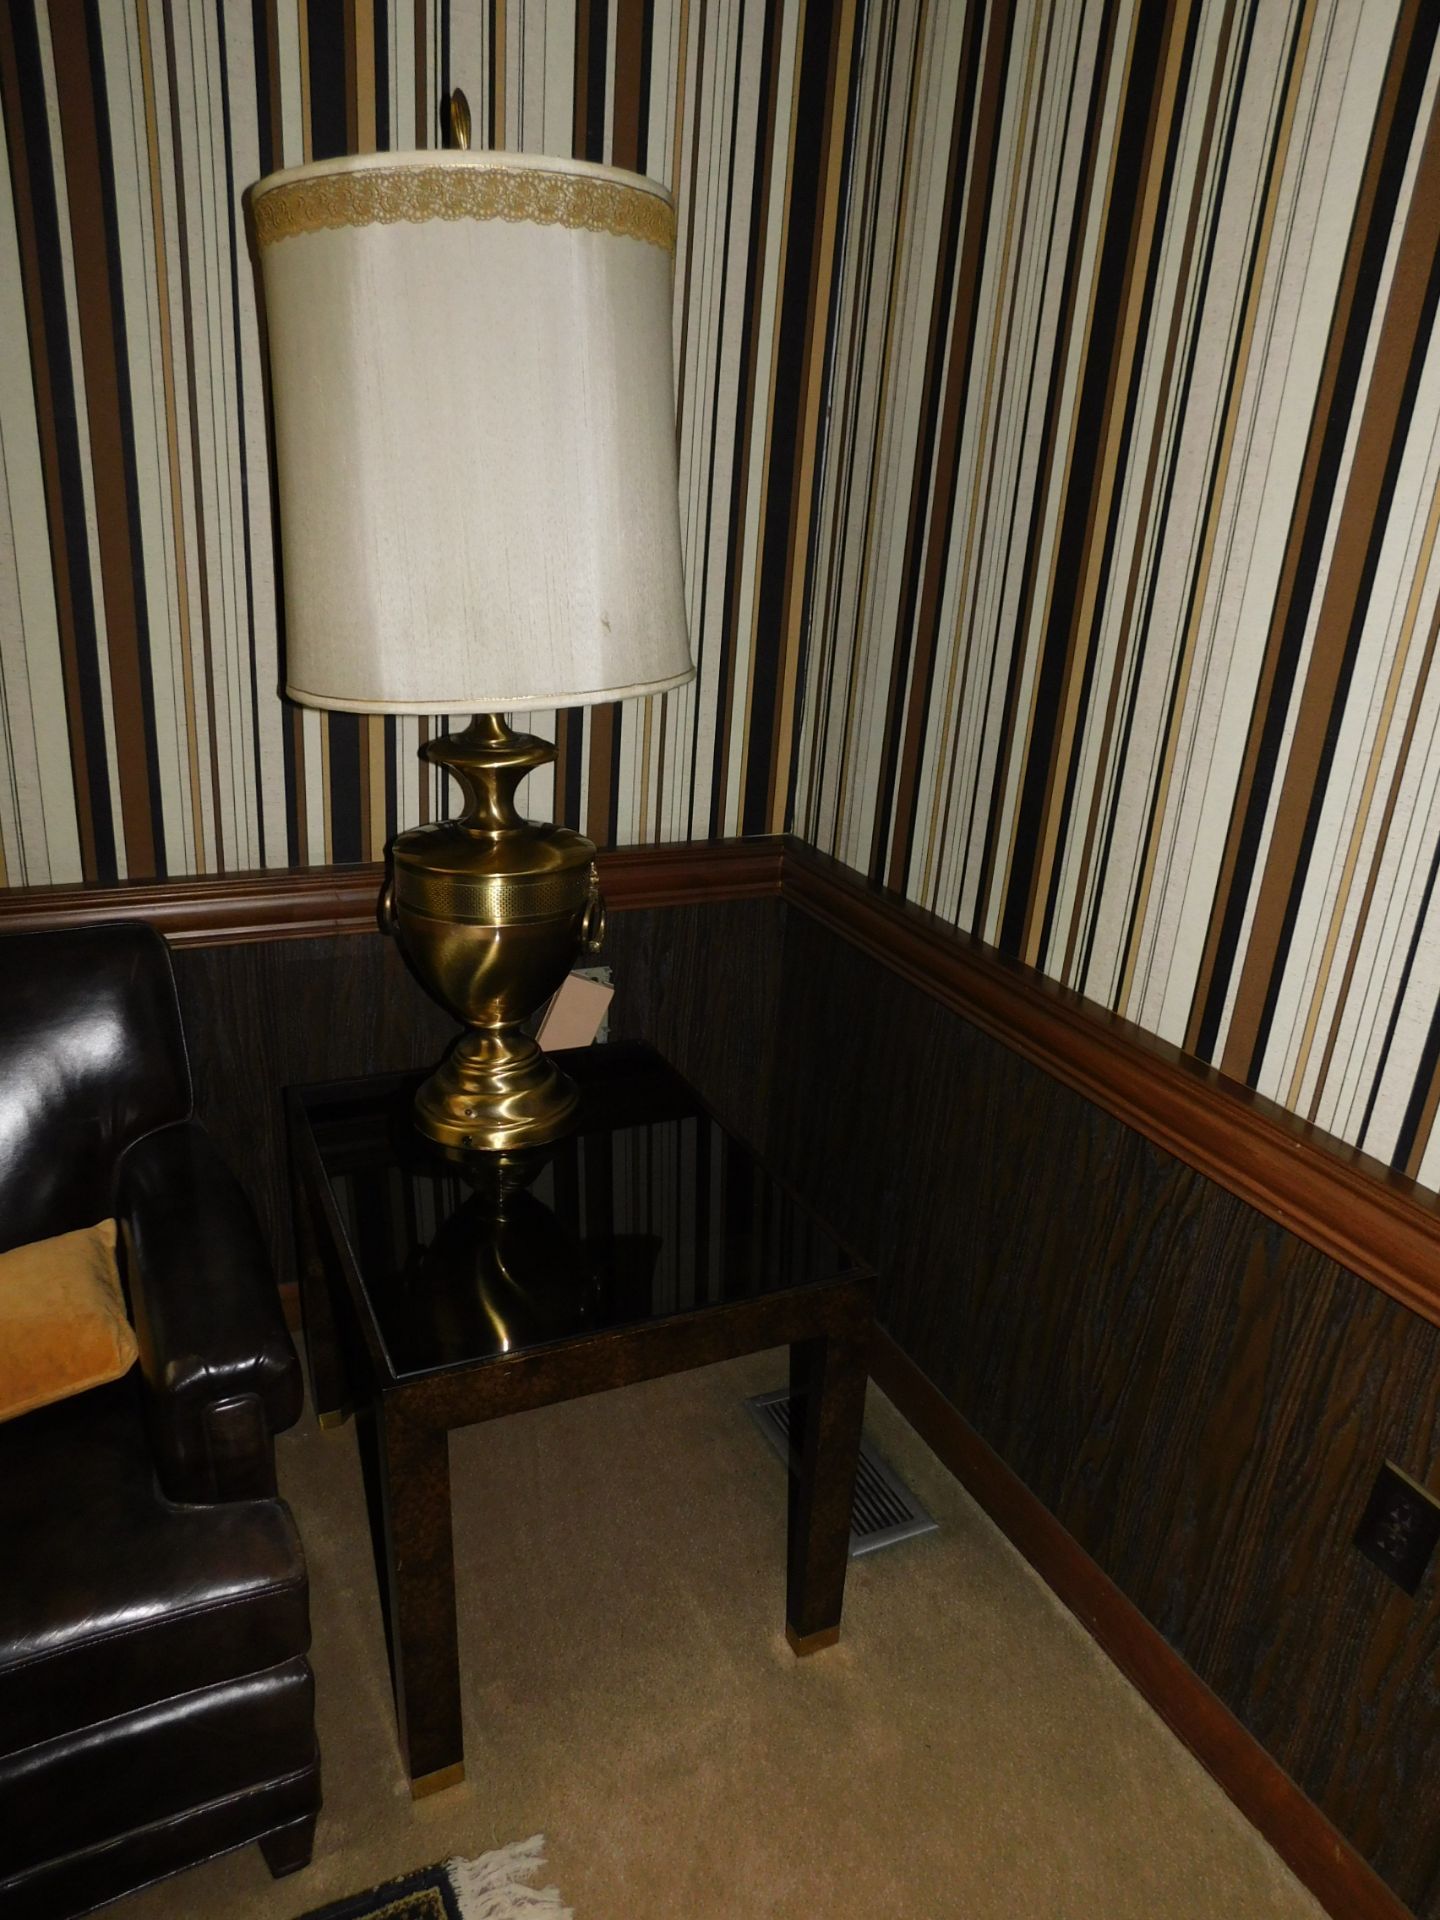 Wooden Double Post Executive Desk and Matching Credenza, Chair on Casters, Decorative Coffee - Image 4 of 5